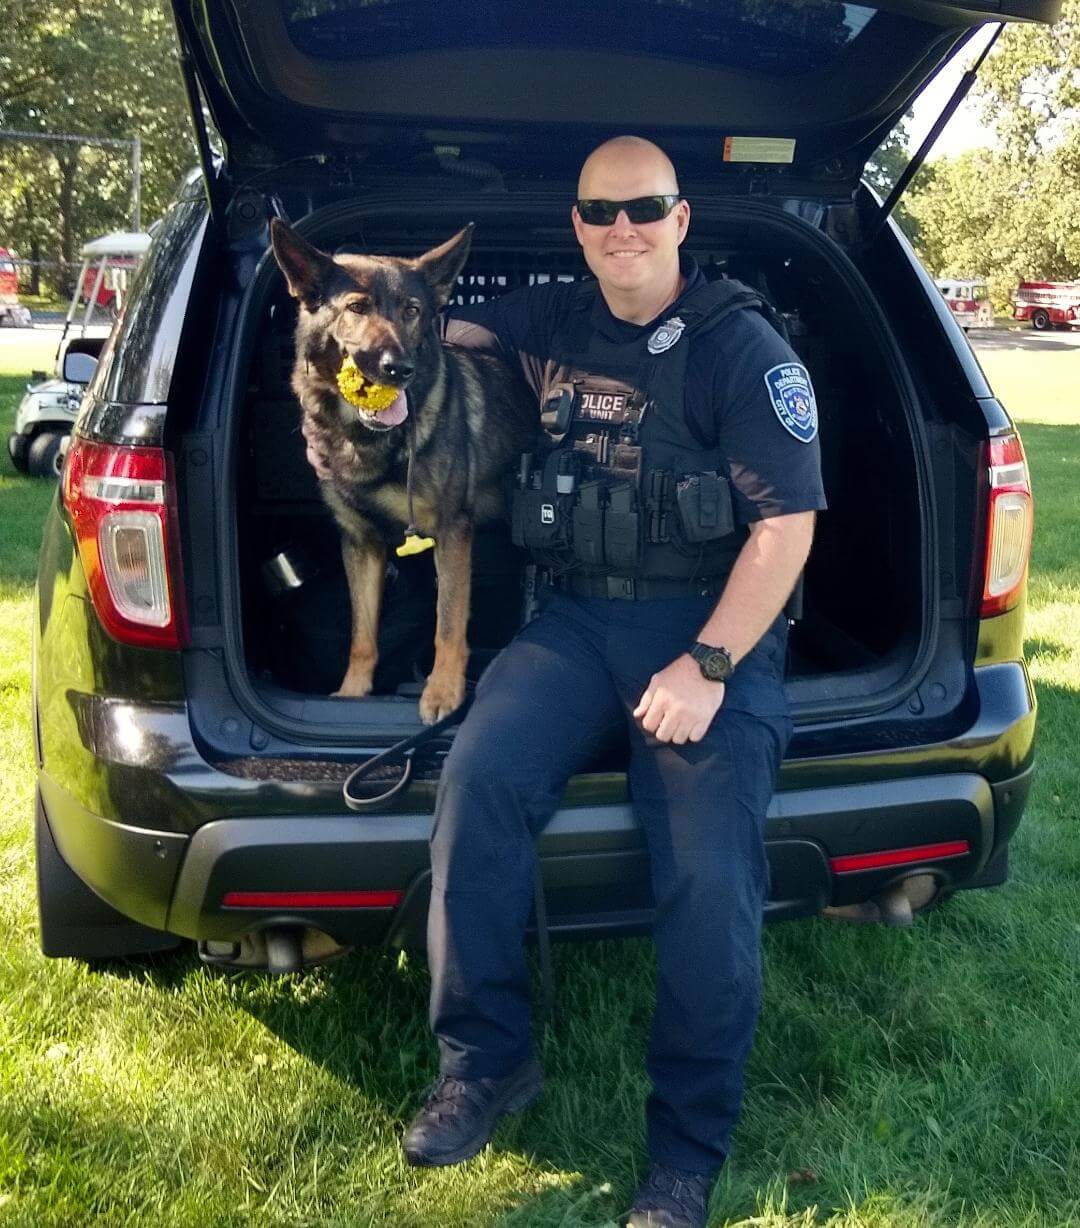 [CREDIT: Lincoln Smith] WPD K-9 Unit - Officer Aaron Steere and his dog Garry during the Antique Fire Truck Show at the Masonic Youth Center Sept. 27, 2021.